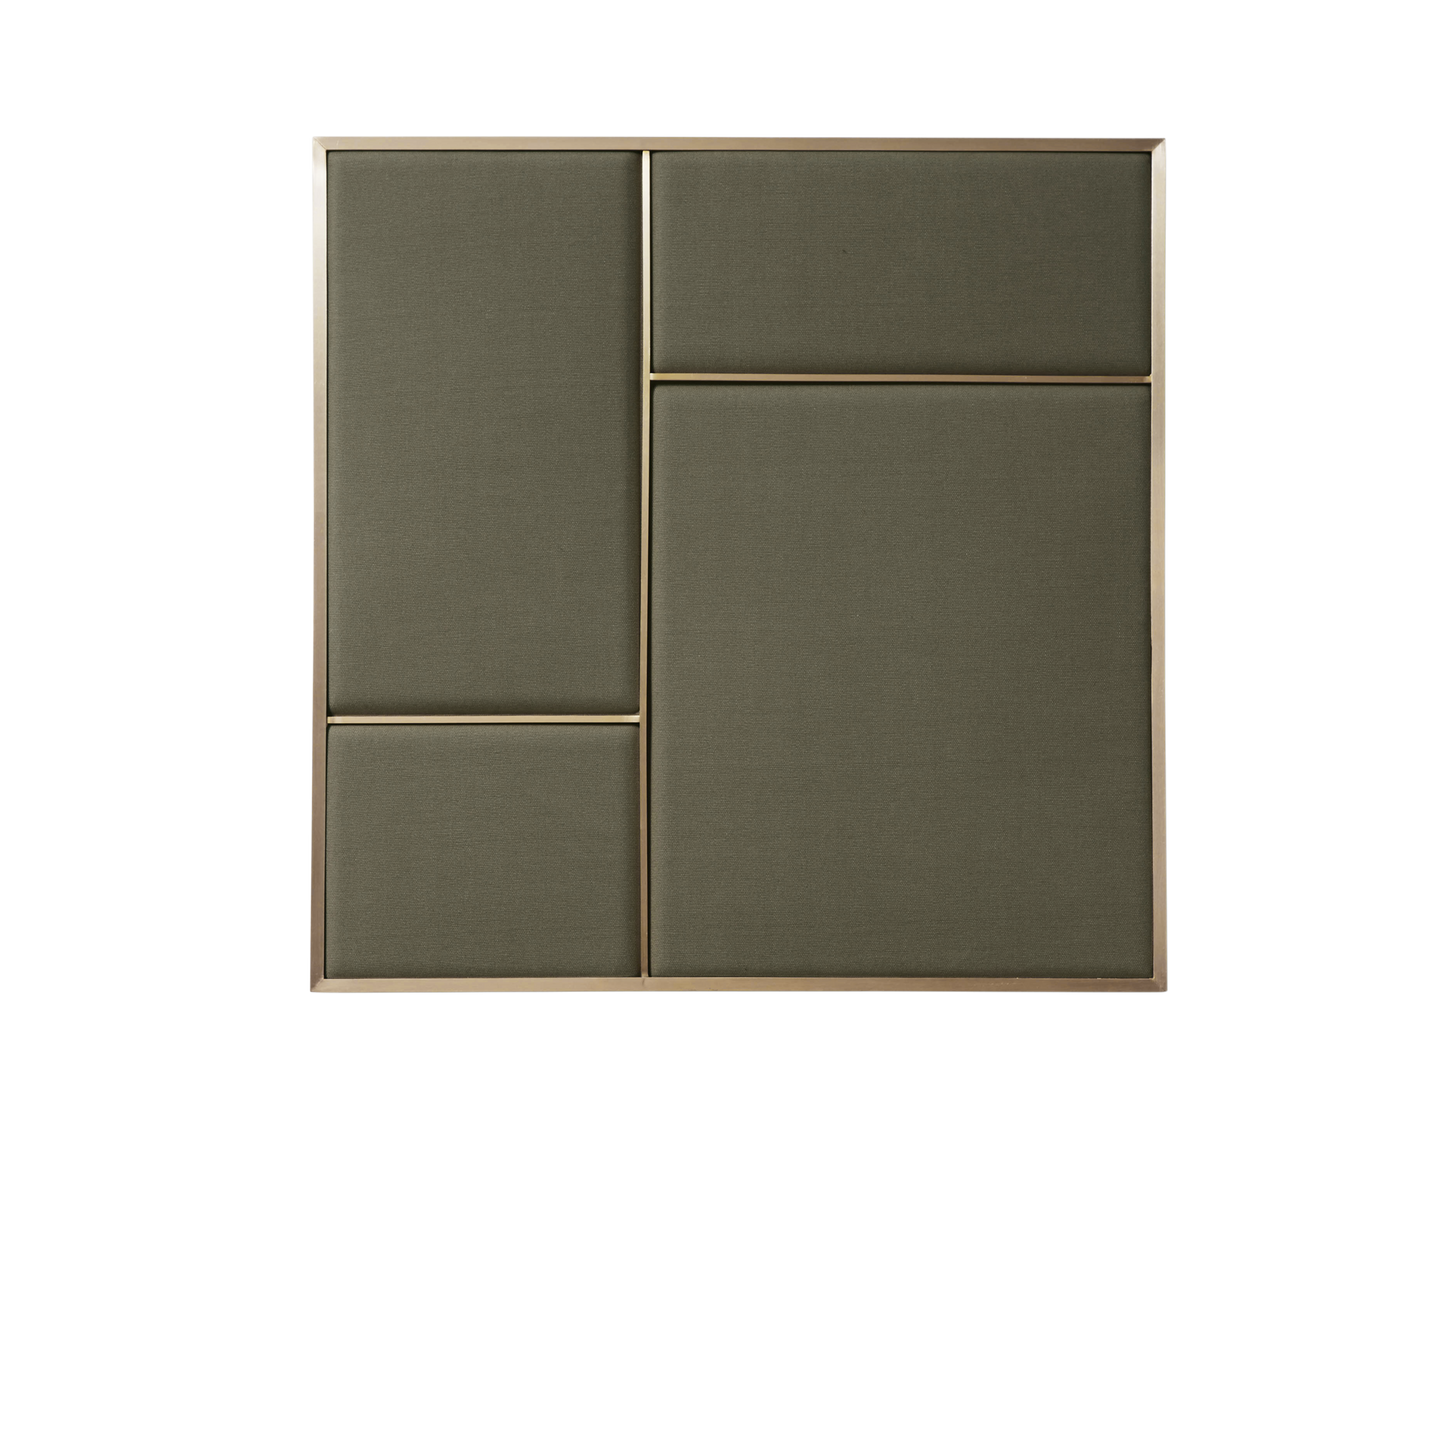 Nouveau Pin Notice Board Medium by Please wait to be seated #Brass/Oyster Grey